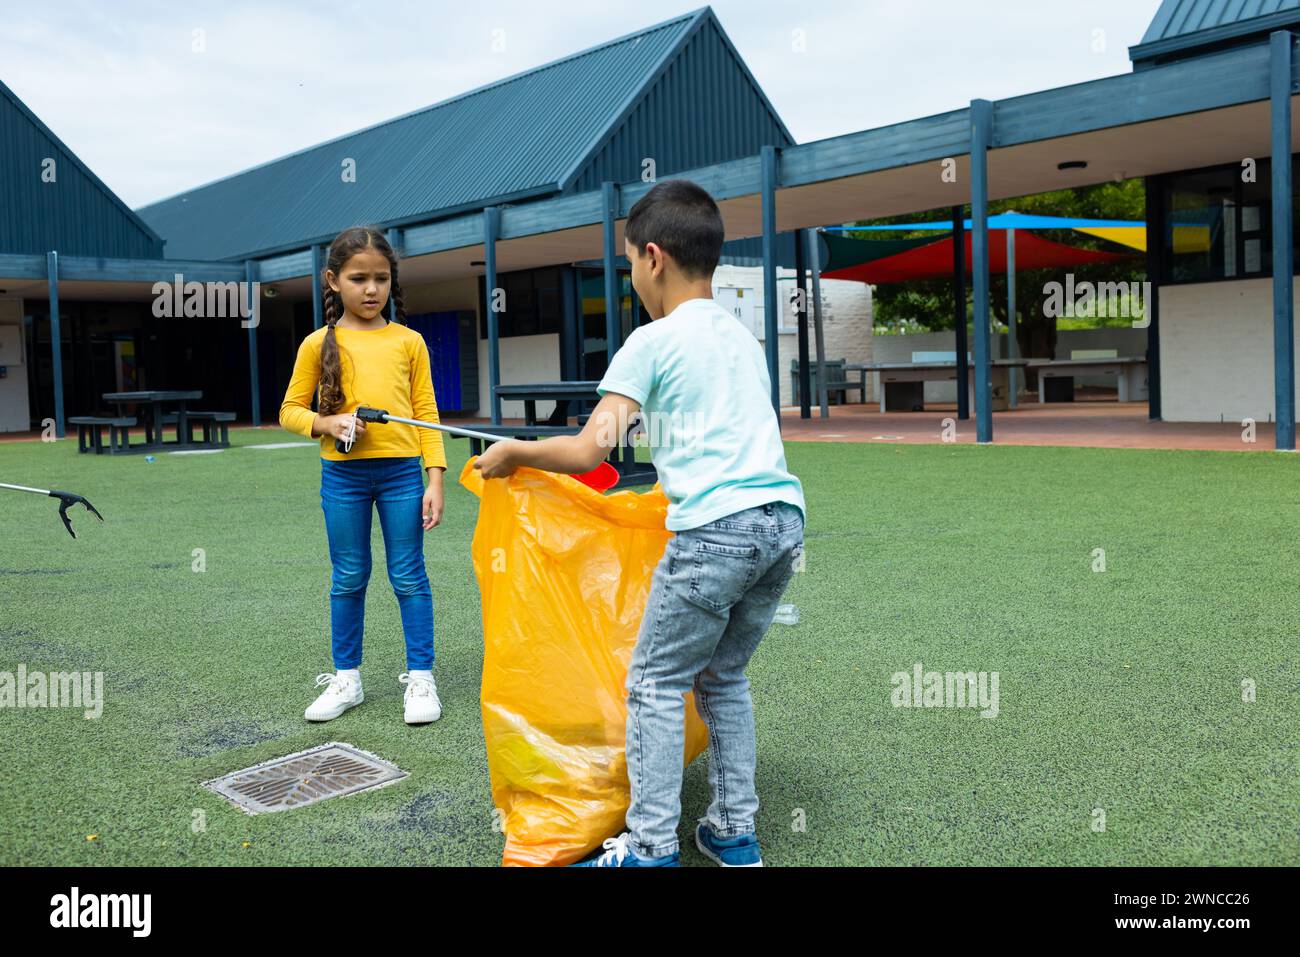 Biracial girl and boy are picking up trash, the girl in a yellow top and the boy in a white tee Stock Photo